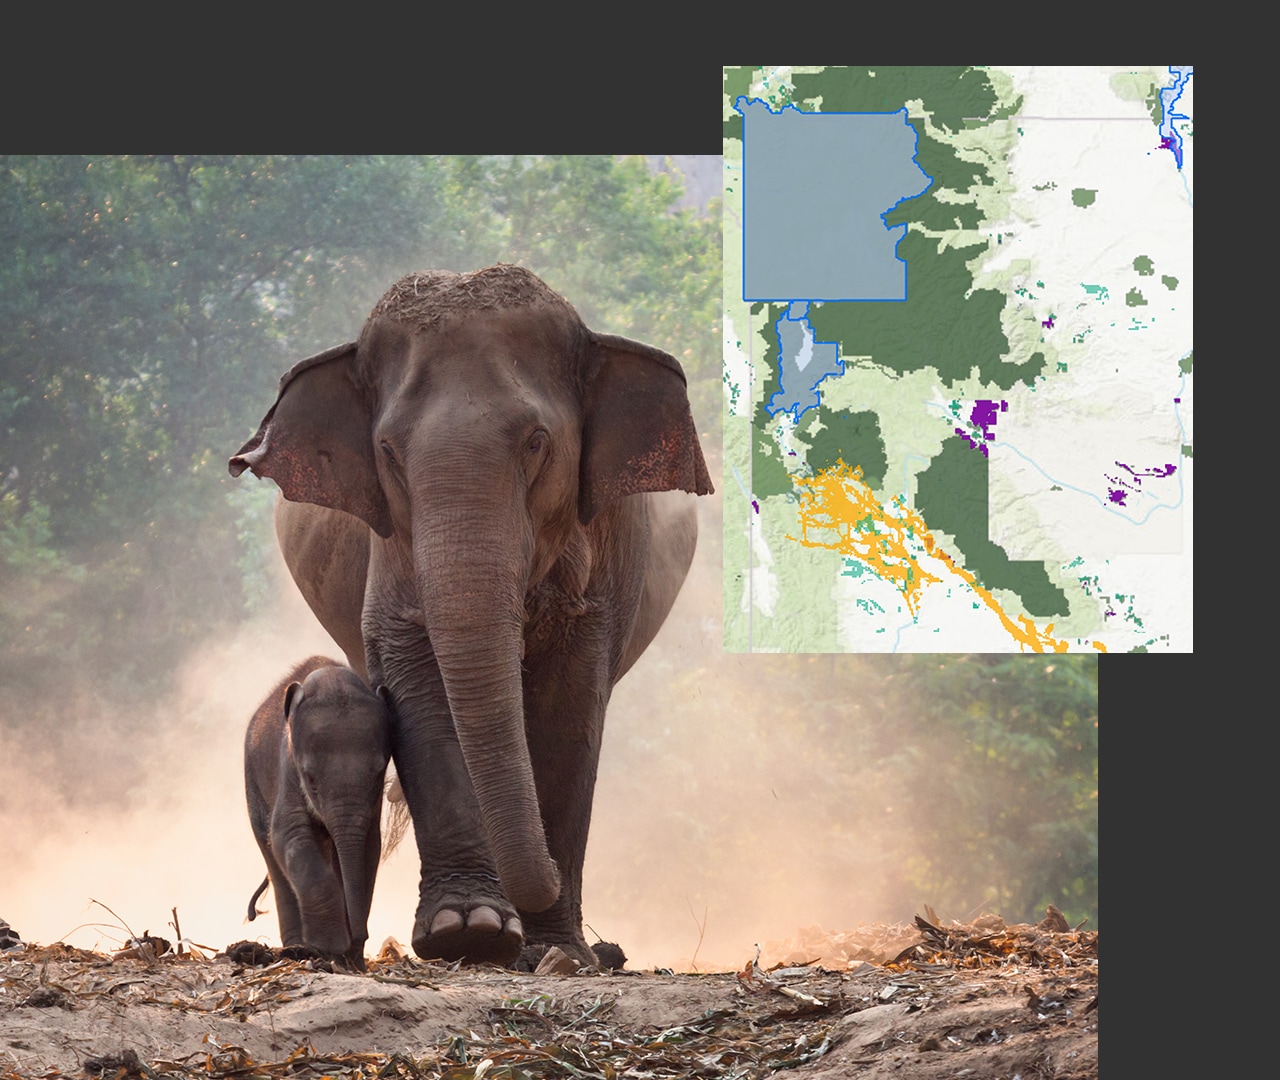 Elephant and baby elephant in the forest near an inset image of a green digital map